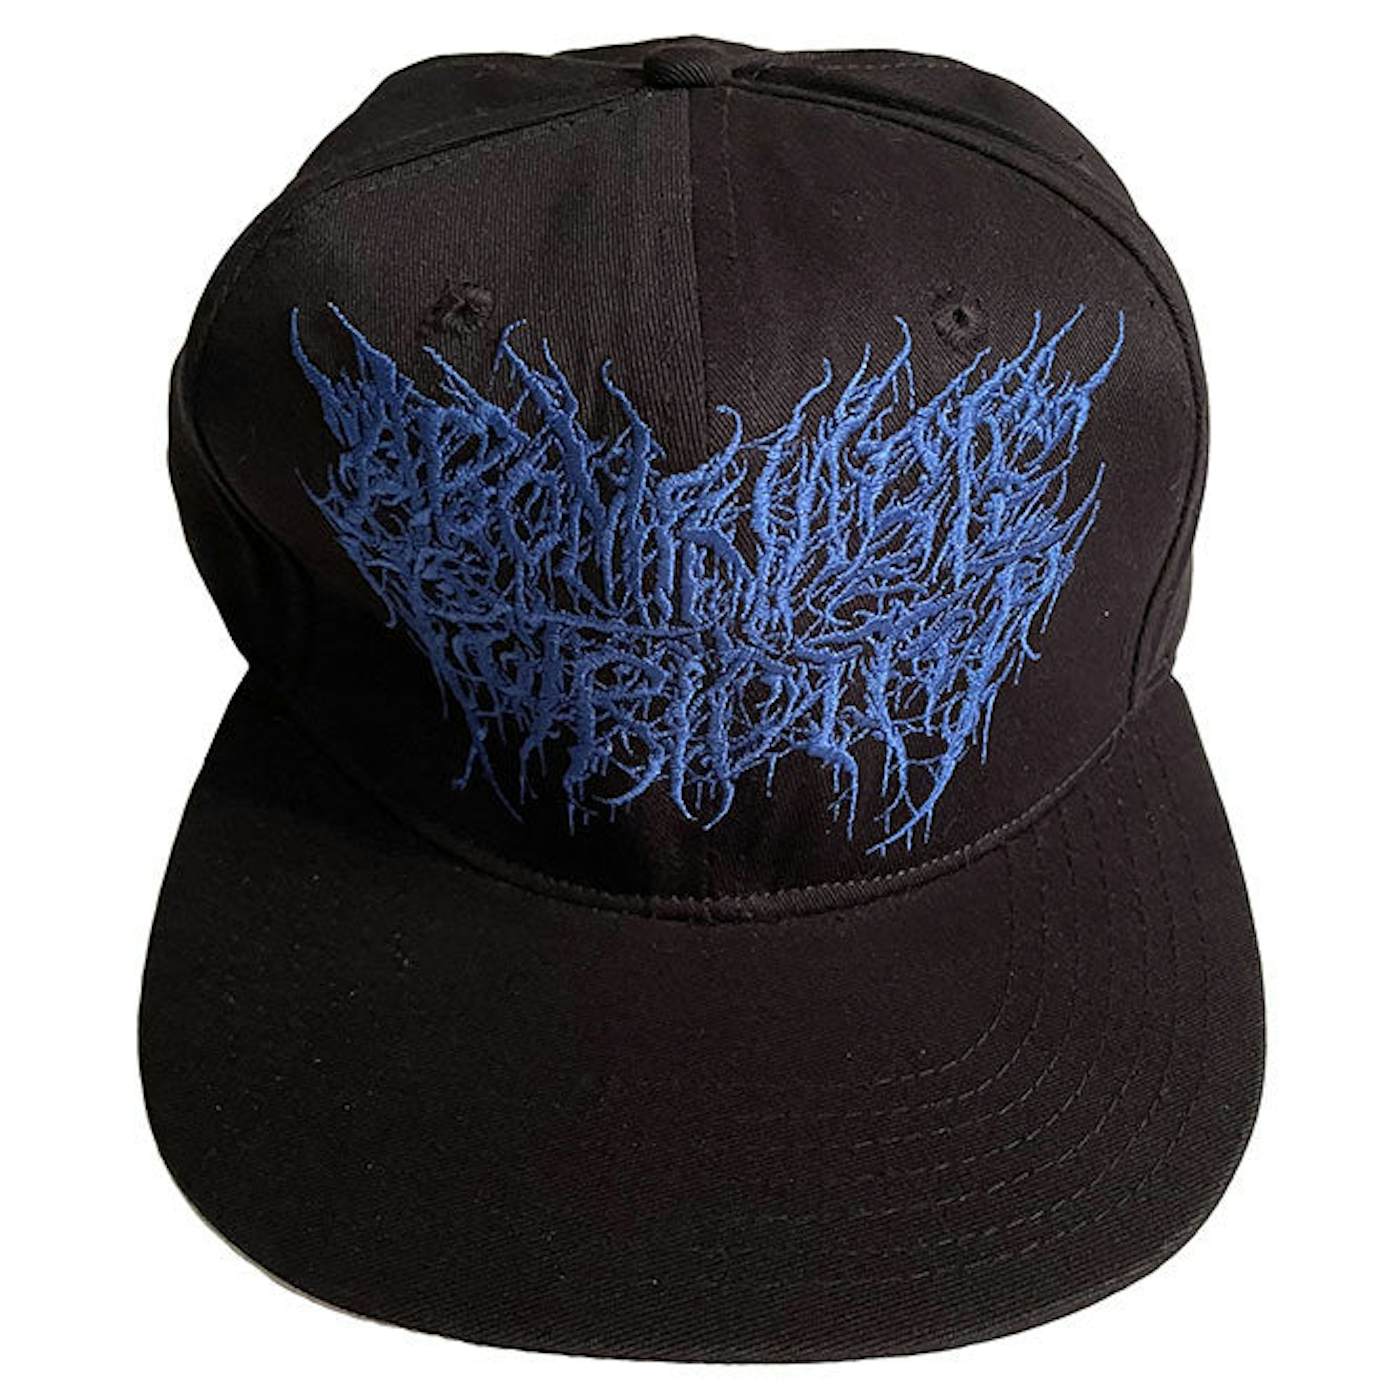 Abominable Putridity "The Anomalies Of Artificial Origin" Hat